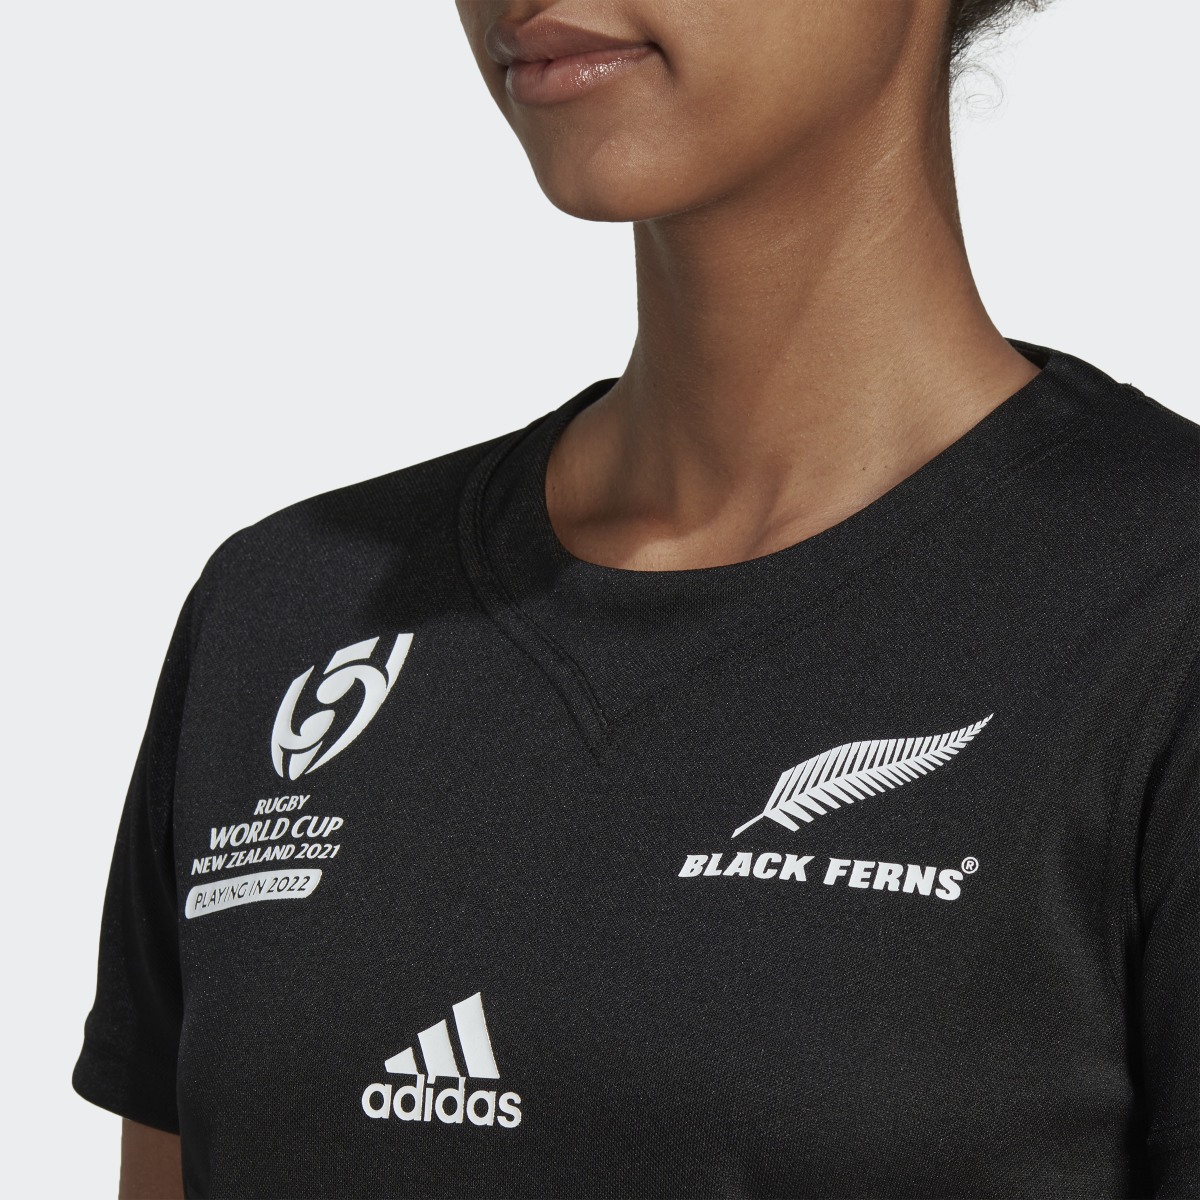 Adidas Black Ferns Rugby World Cup Home Jersey. 10